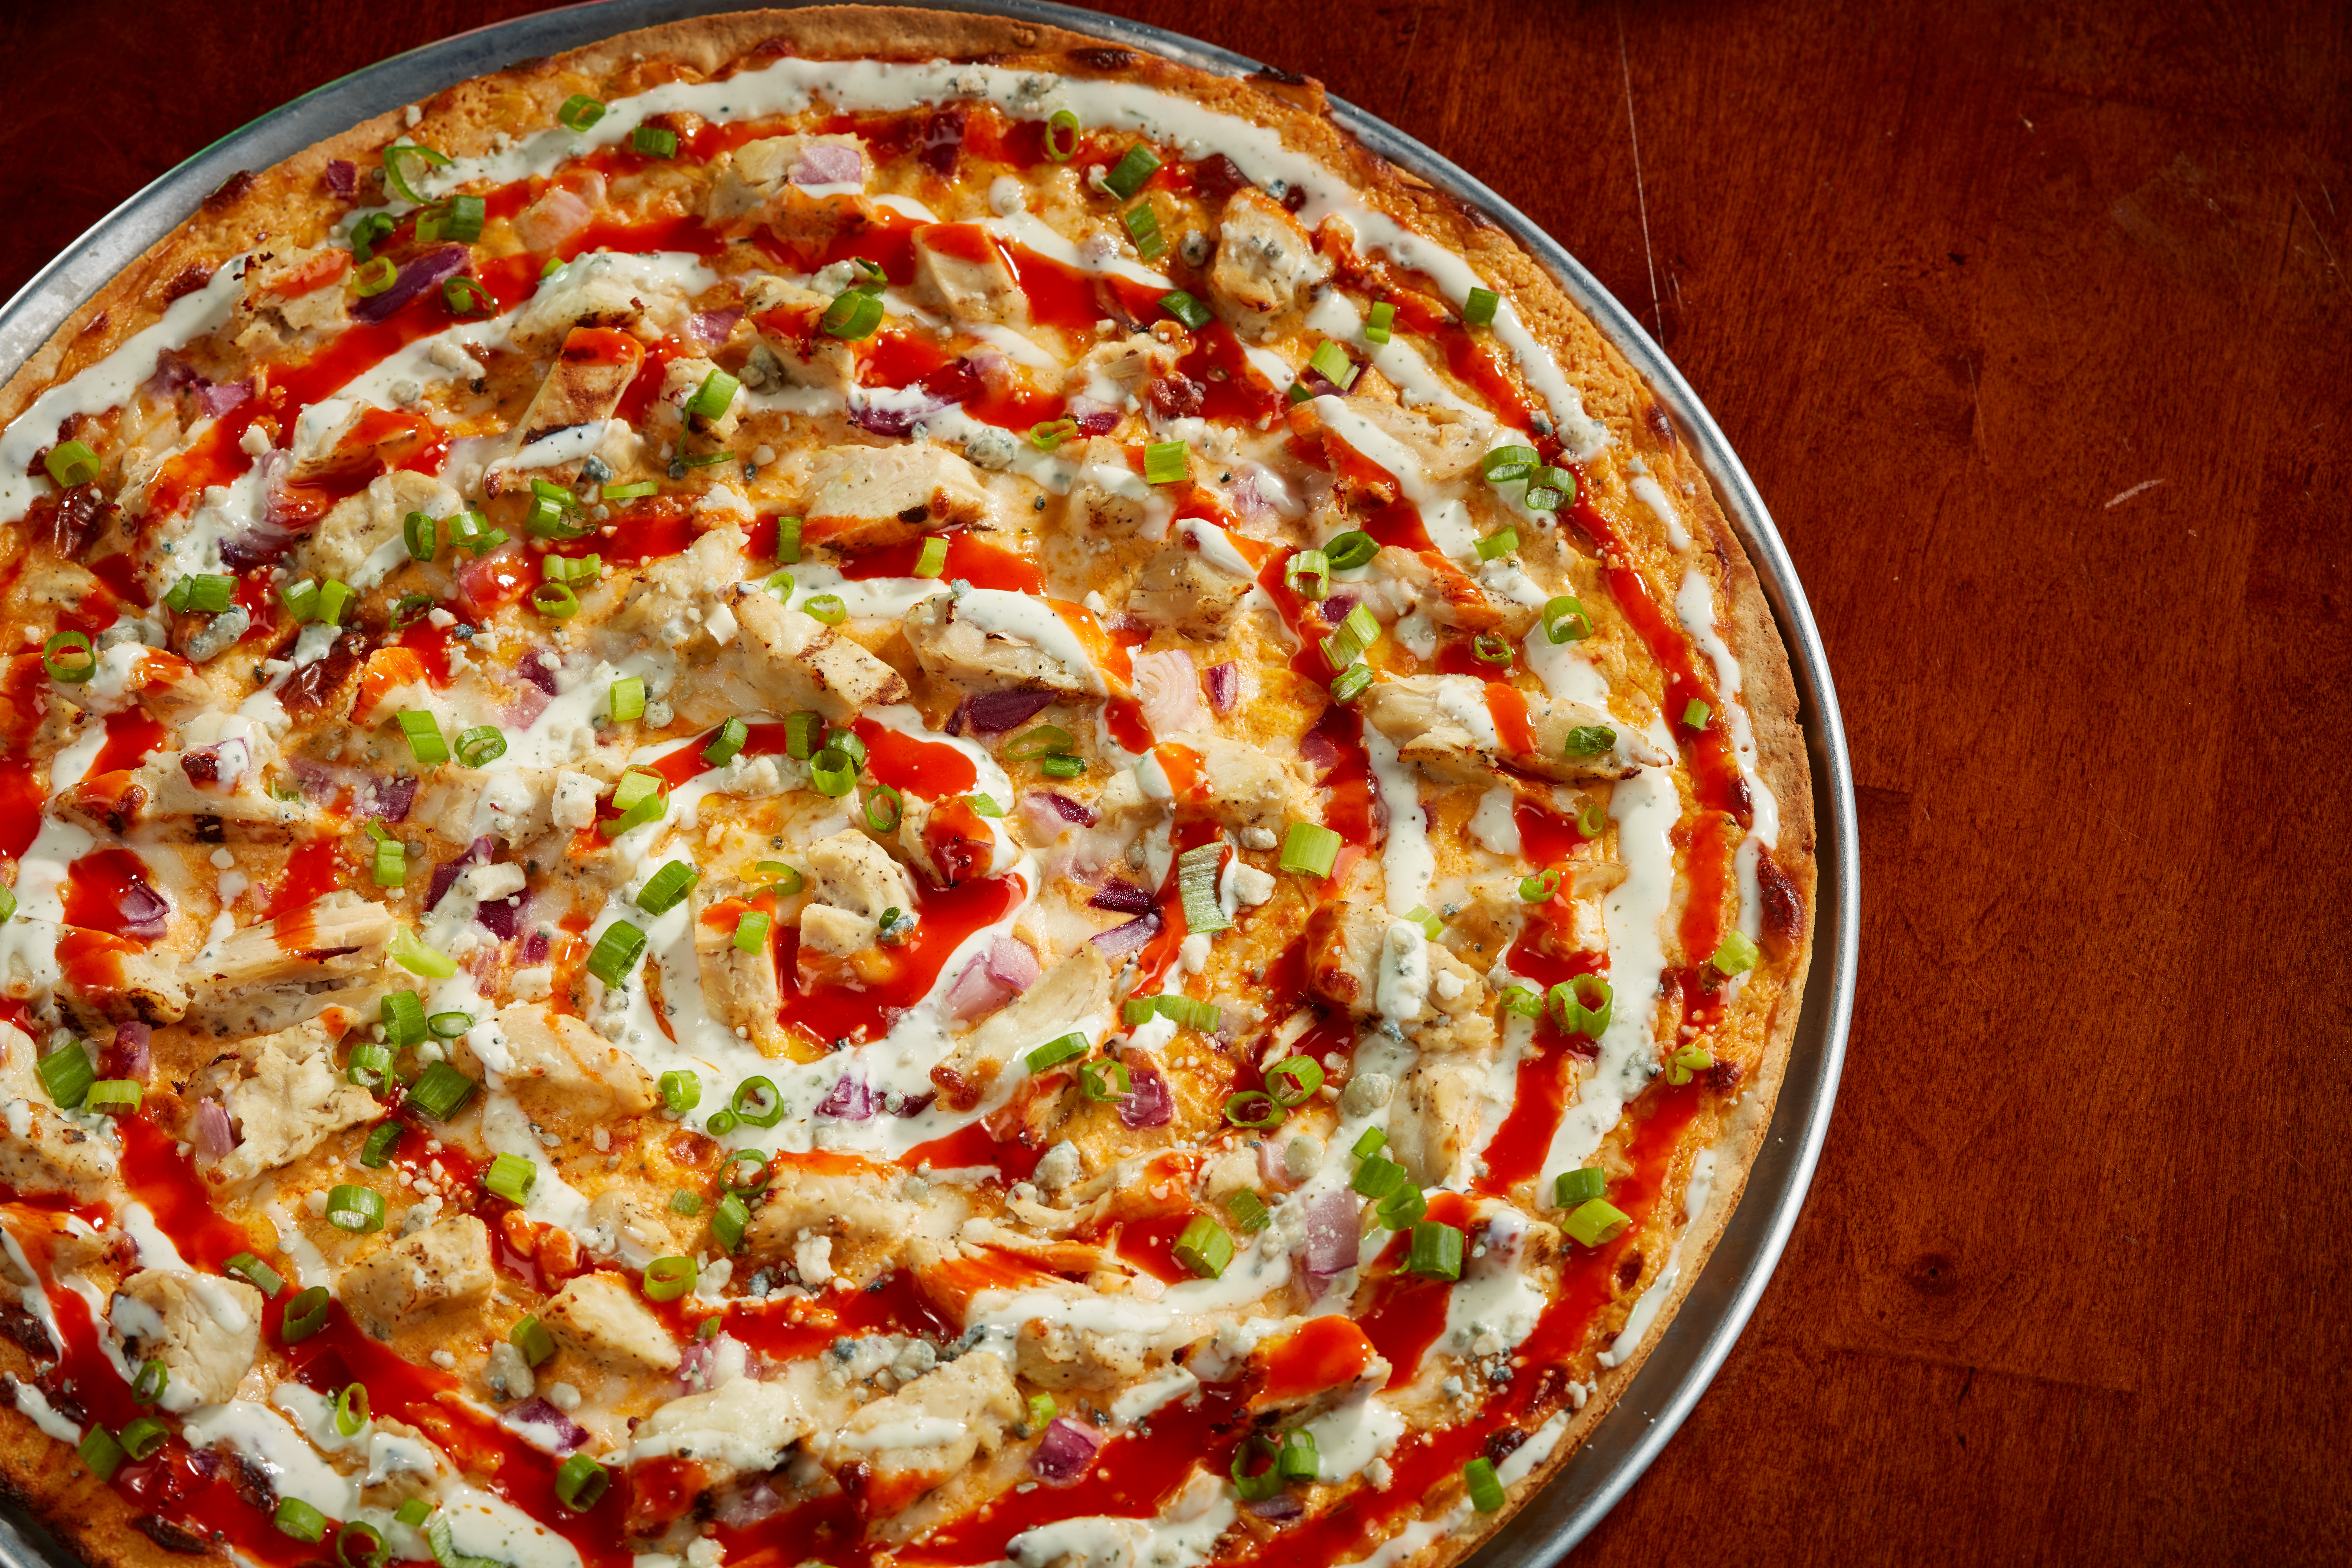 Our thin crust with house-made buffalo cheese sauce, grilled chicken, sliced red onion, mozzarella and blue cheese, topped with green onion, buffalo sauce and ranch dressing. $22.99